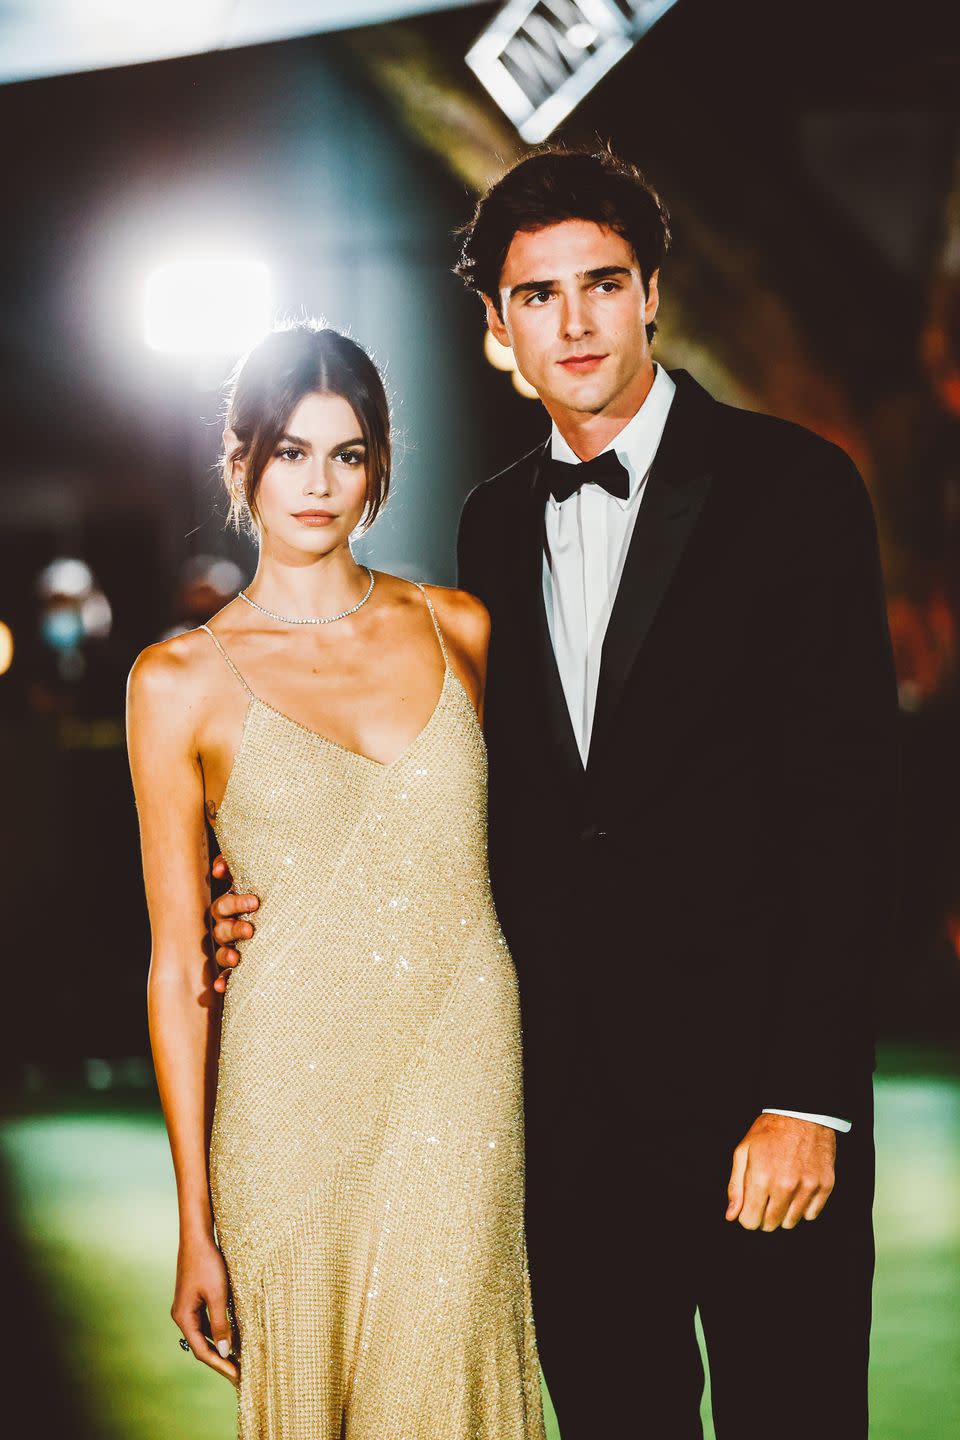 los angeles, california september 25 editors note image has been edited using digital filters kaia gerber and jacob elordi attend the academy museum of motion pictures opening gala at academy museum of motion pictures on september 25, 2021 in los angeles, california photo by matt winkelmeyerwireimage,